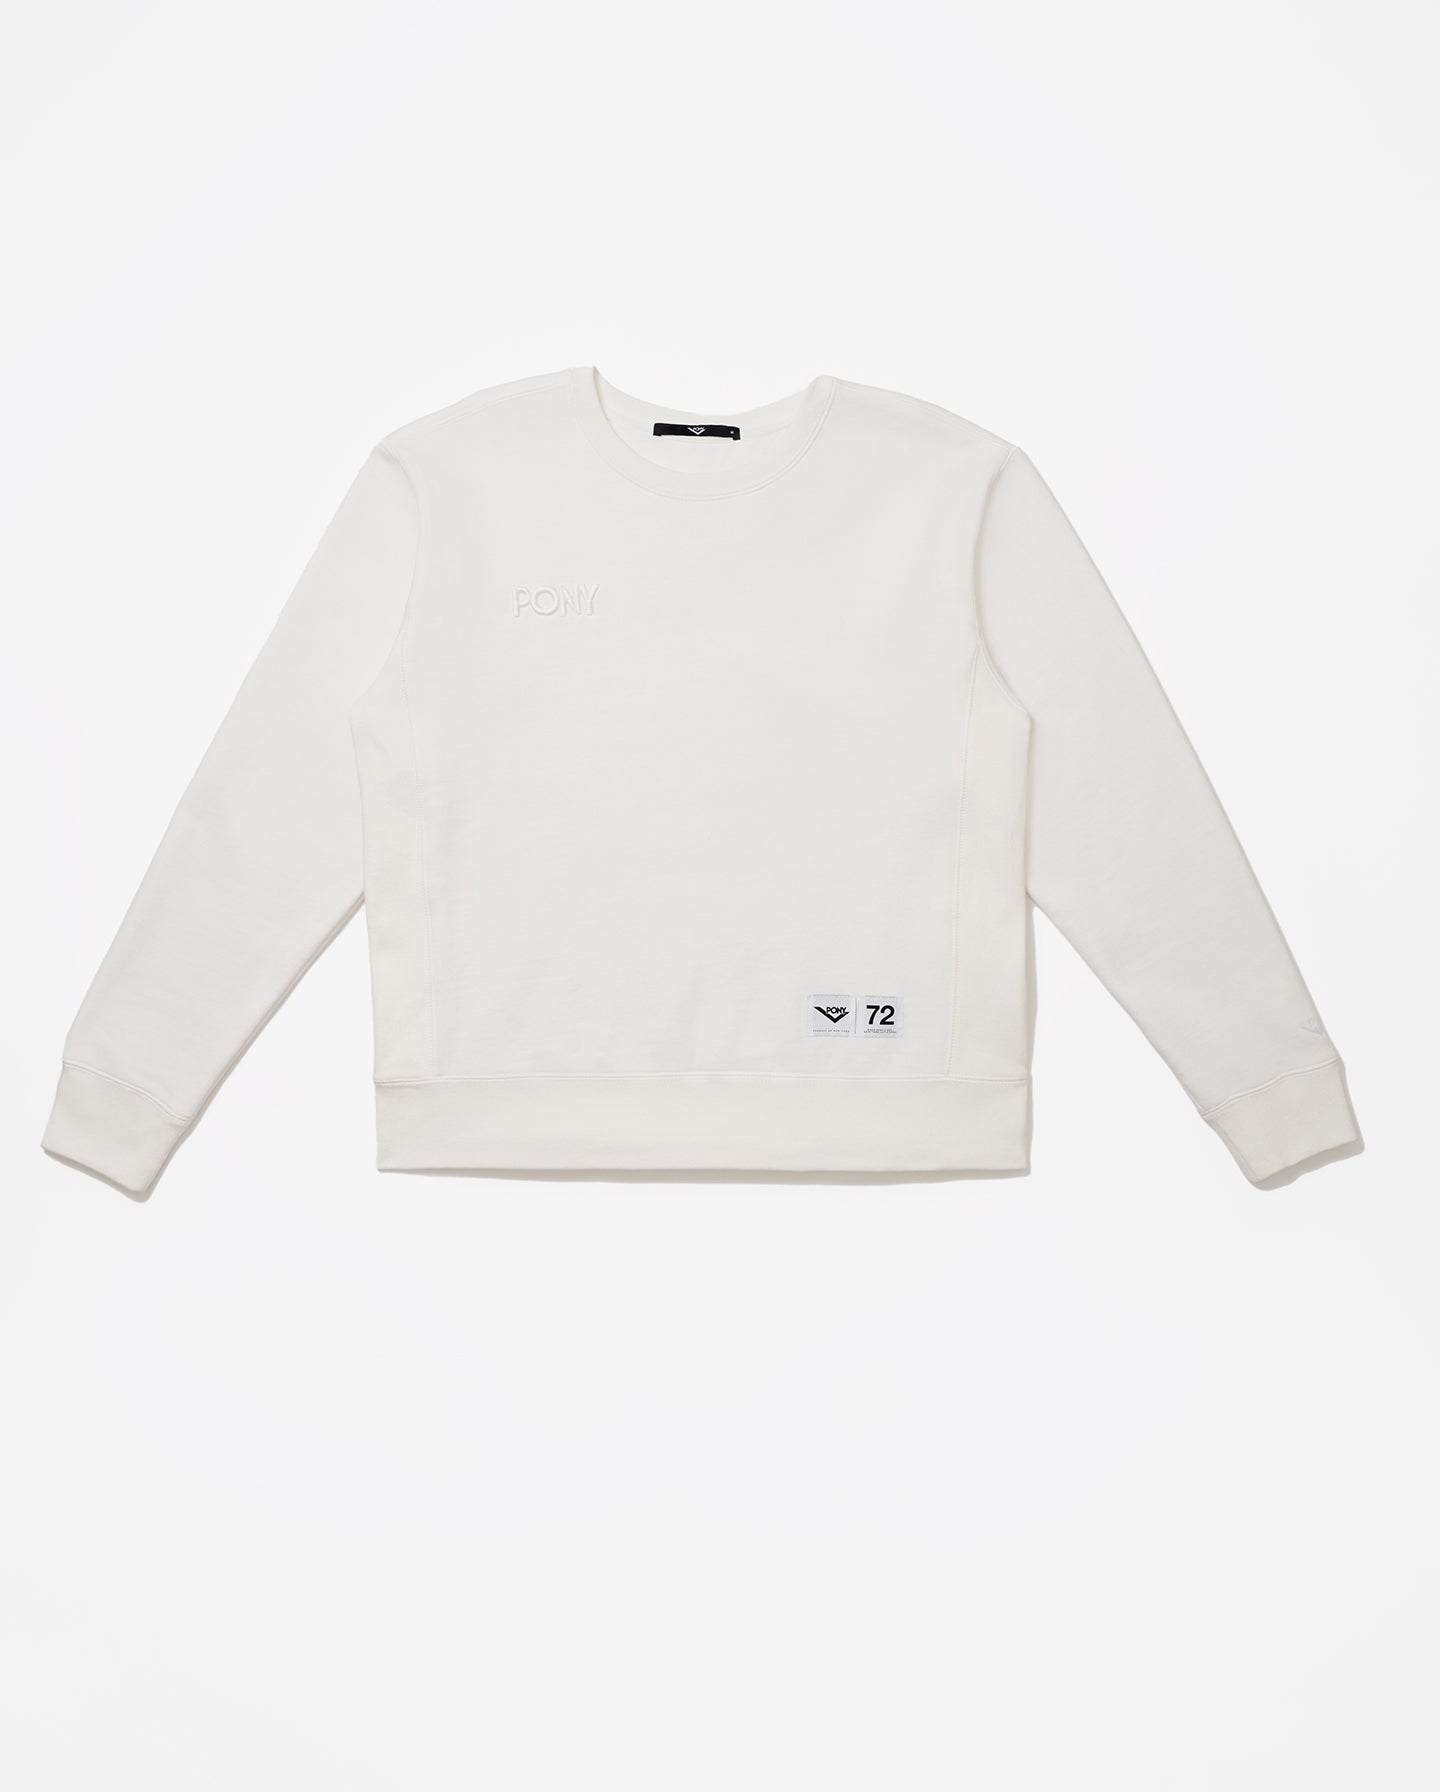 A white PONY embroidered sweatshirt with Embroidered PONY word mark logo and PONY locker label with PONY Chevron and "72" sewn in bottom righthand corner.